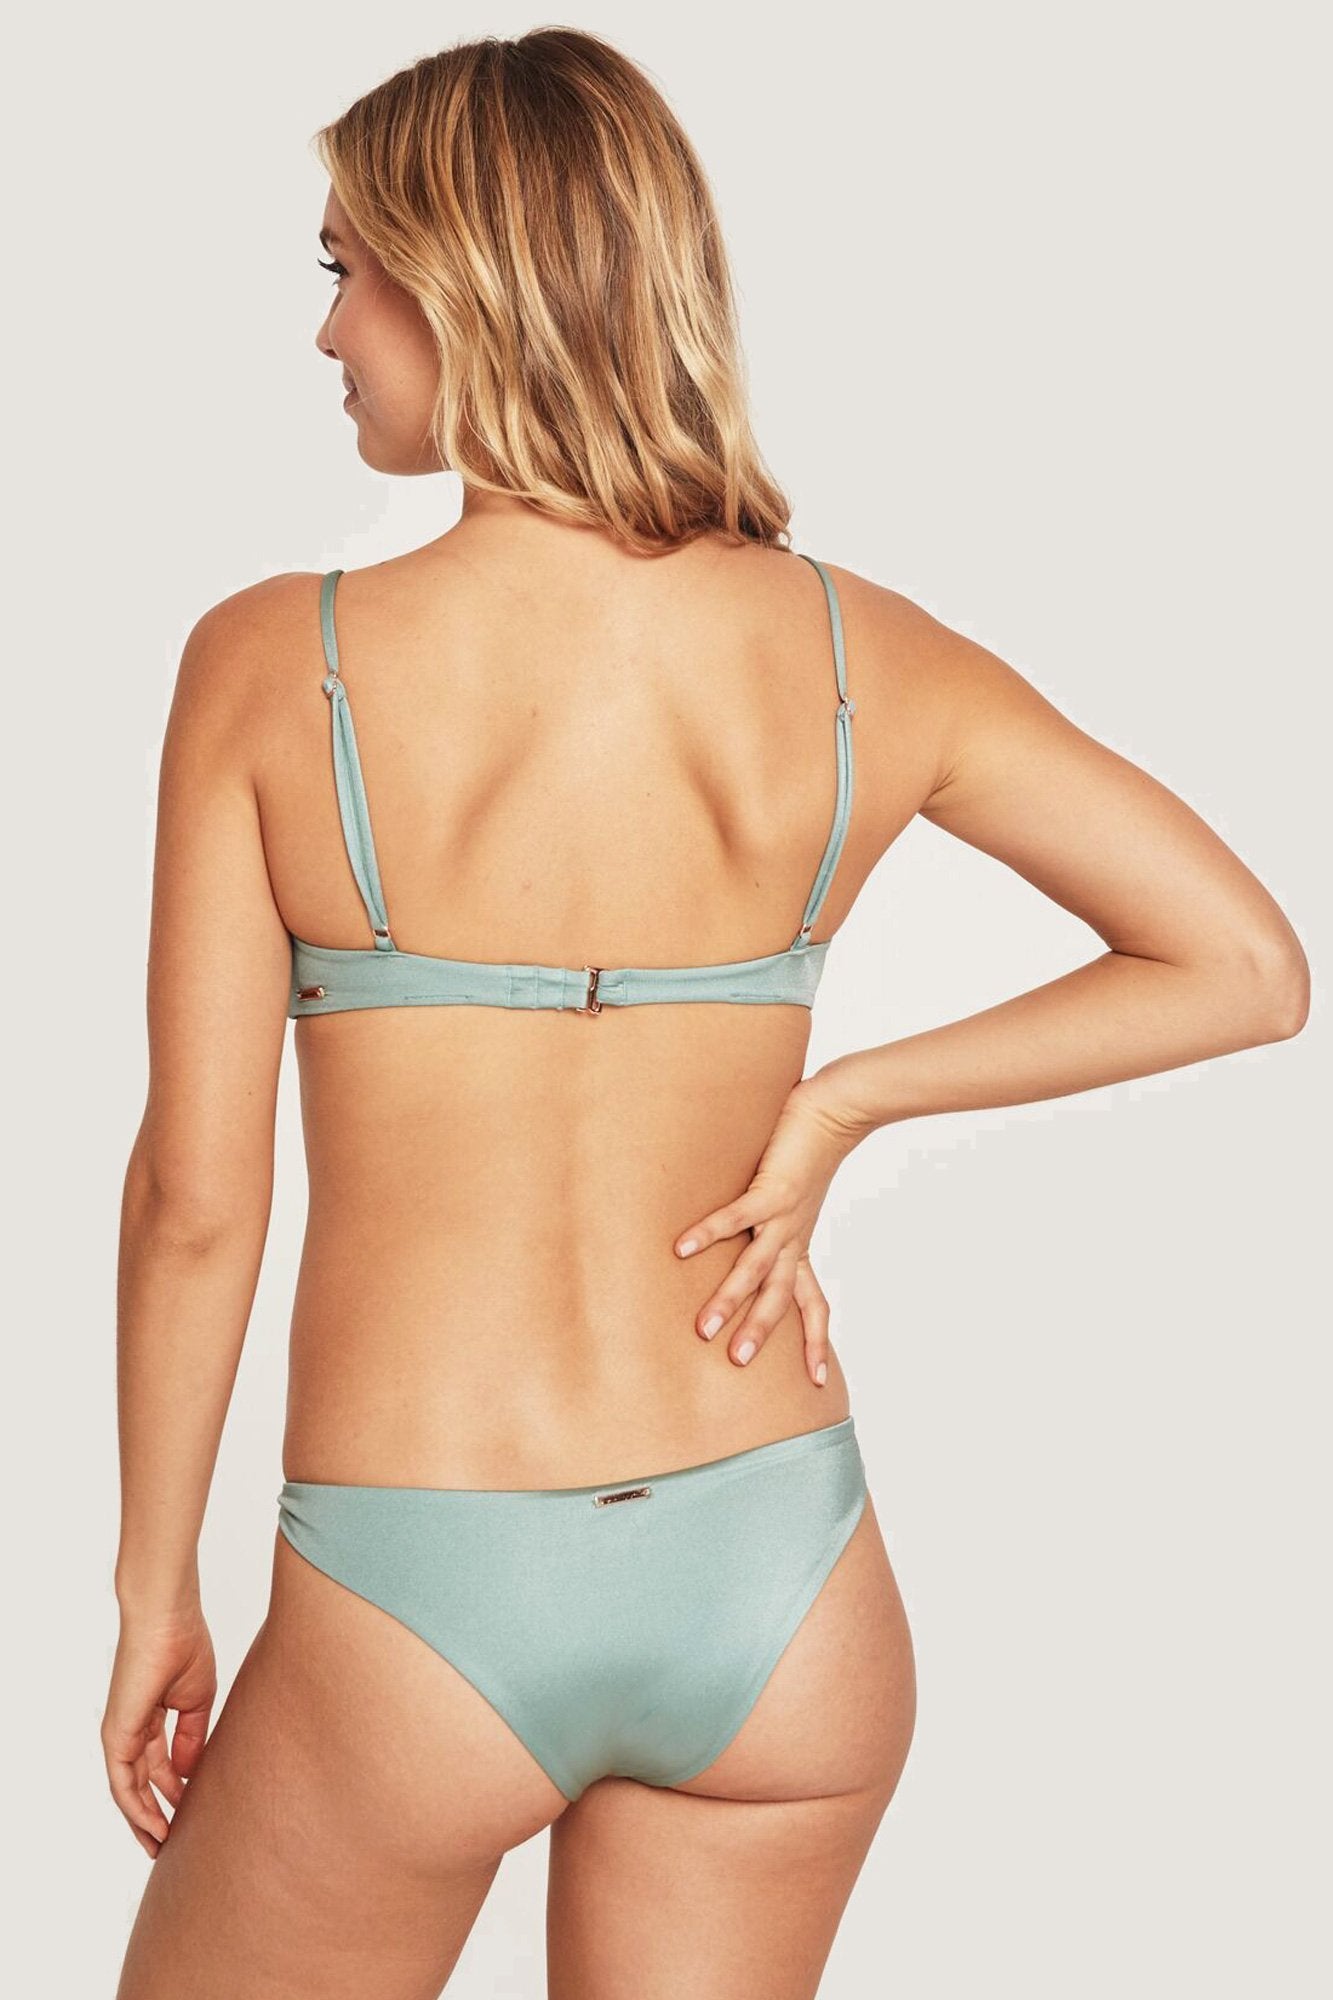 Back view of model wearing light, dusty green, low-rise spiritual gangster bikini bottoms. The Cozumel bikini bottoms in sage features a knotted side detail.